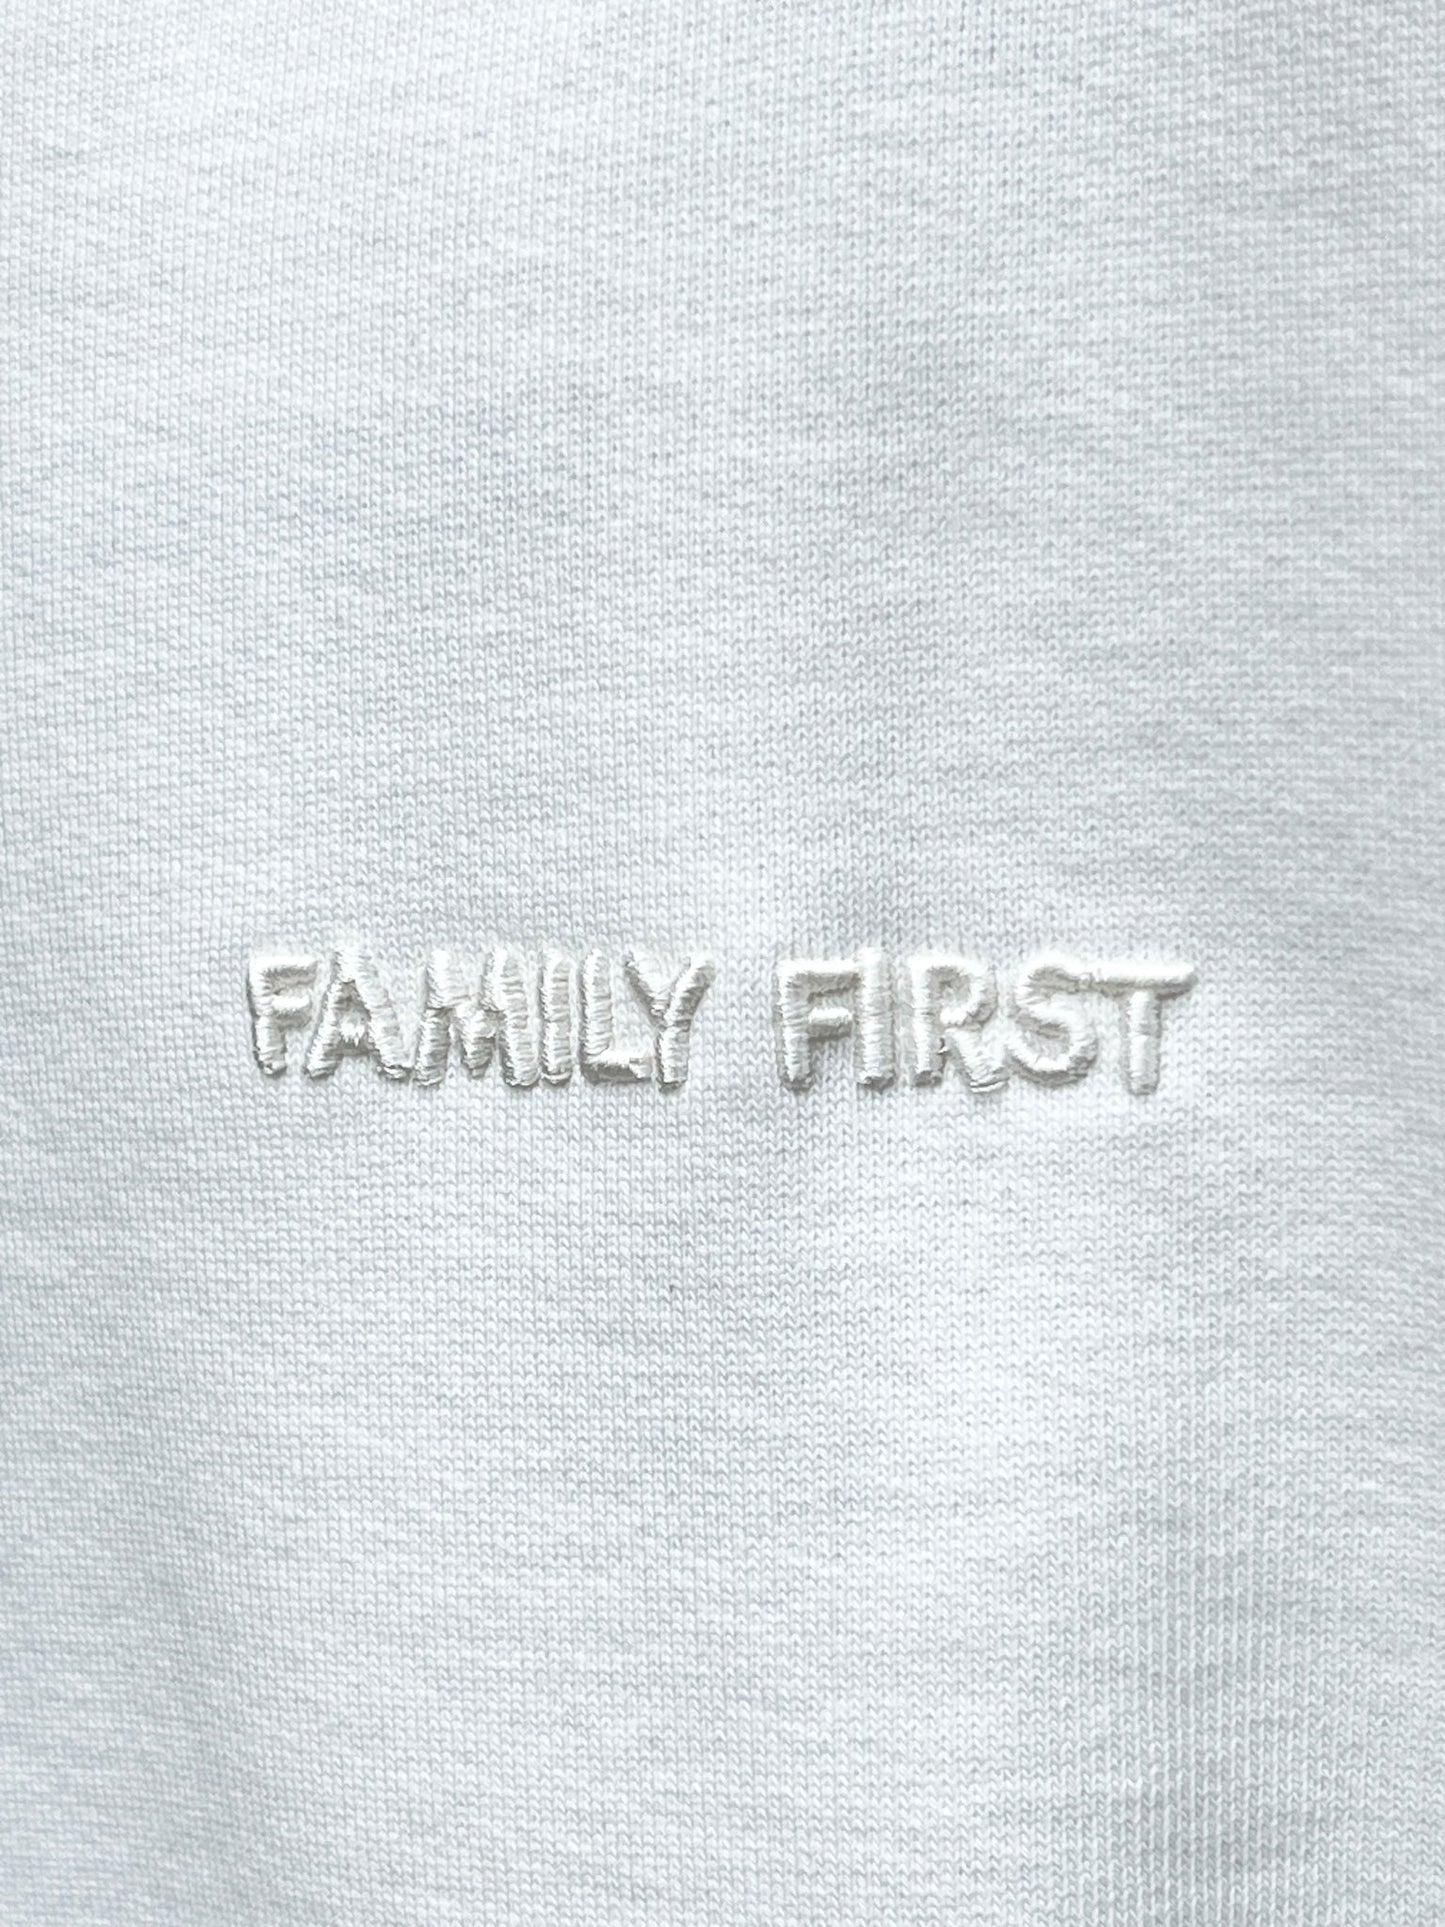 Close-up of FAMILY FIRST 100% cotton fabric with the phrase "family first" embroidered in raised white letters.